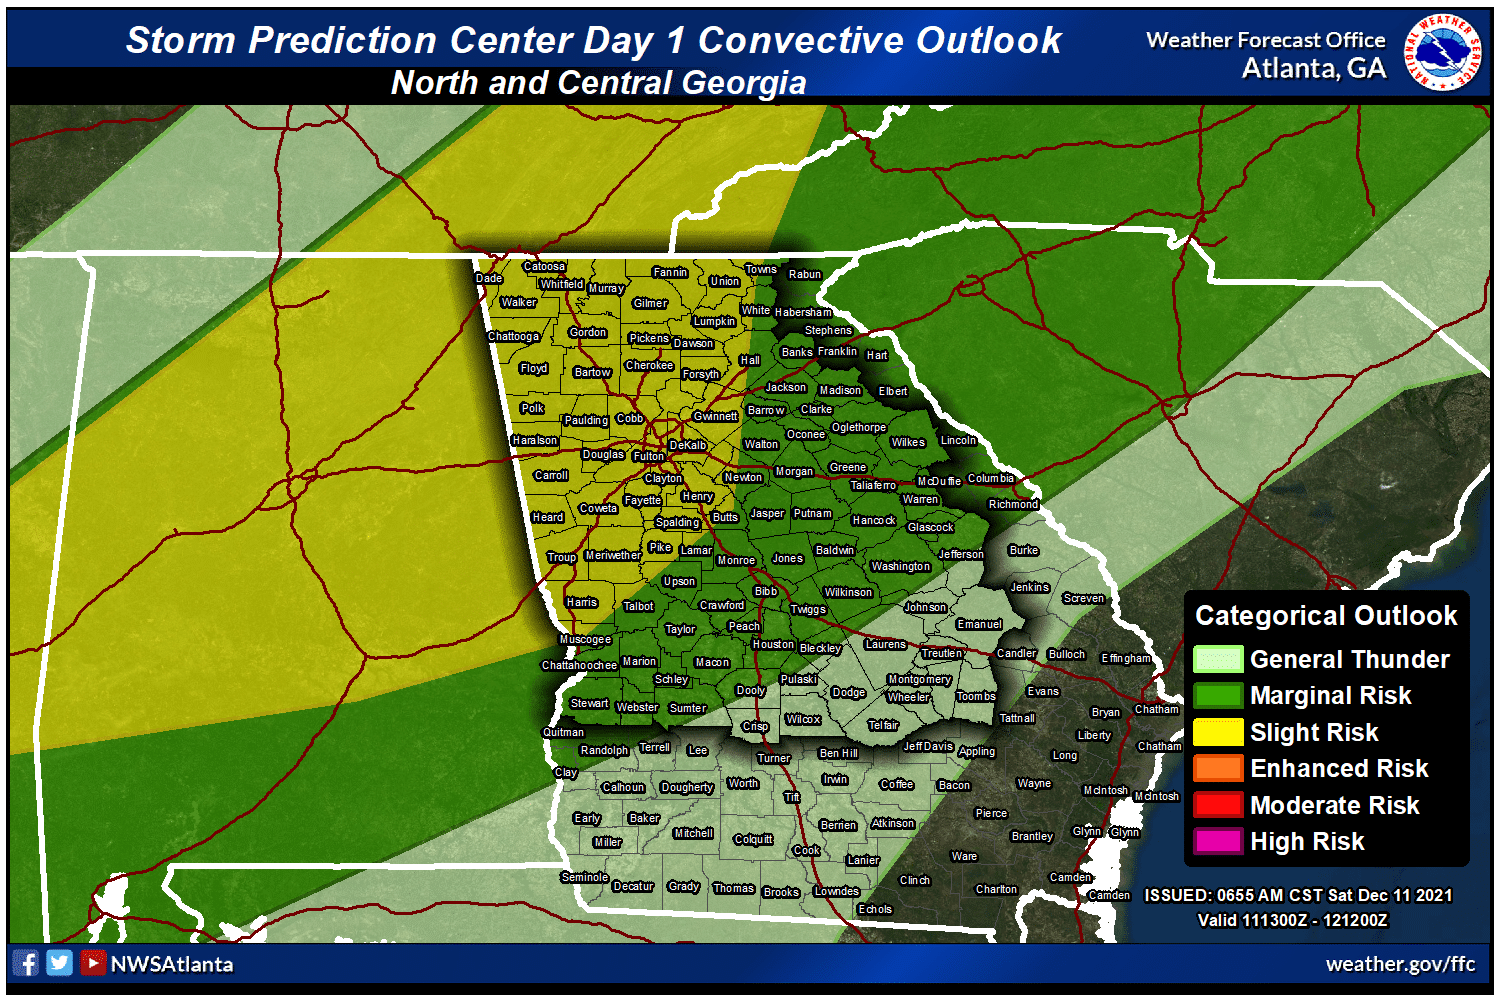 Expect thunderstorms throughout Georgia today